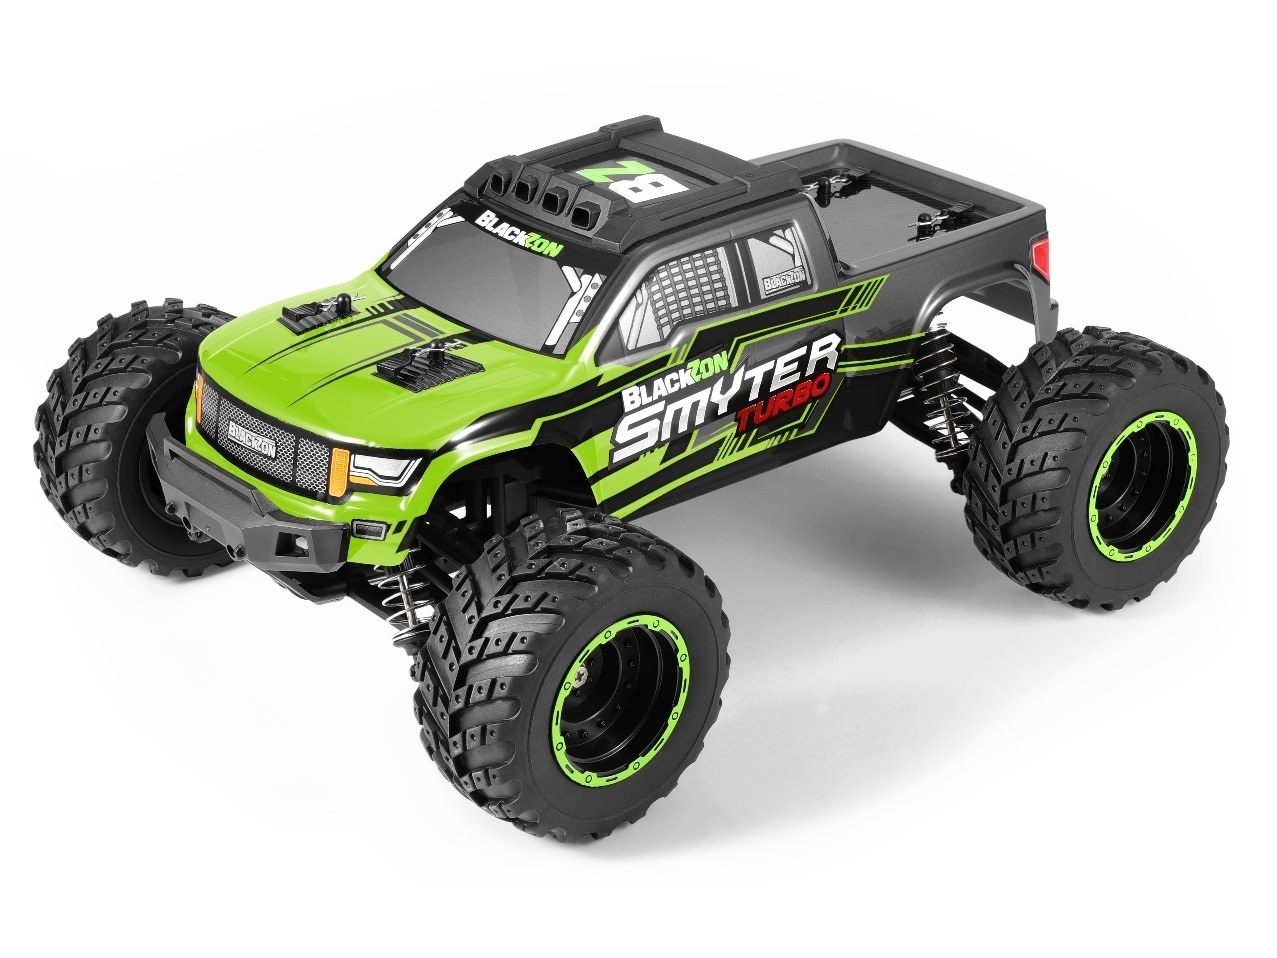 Cars Elect RTR BLACKZON 1/12 Scale - Smyter MT Turbo 4wd 3S Brushless - Green